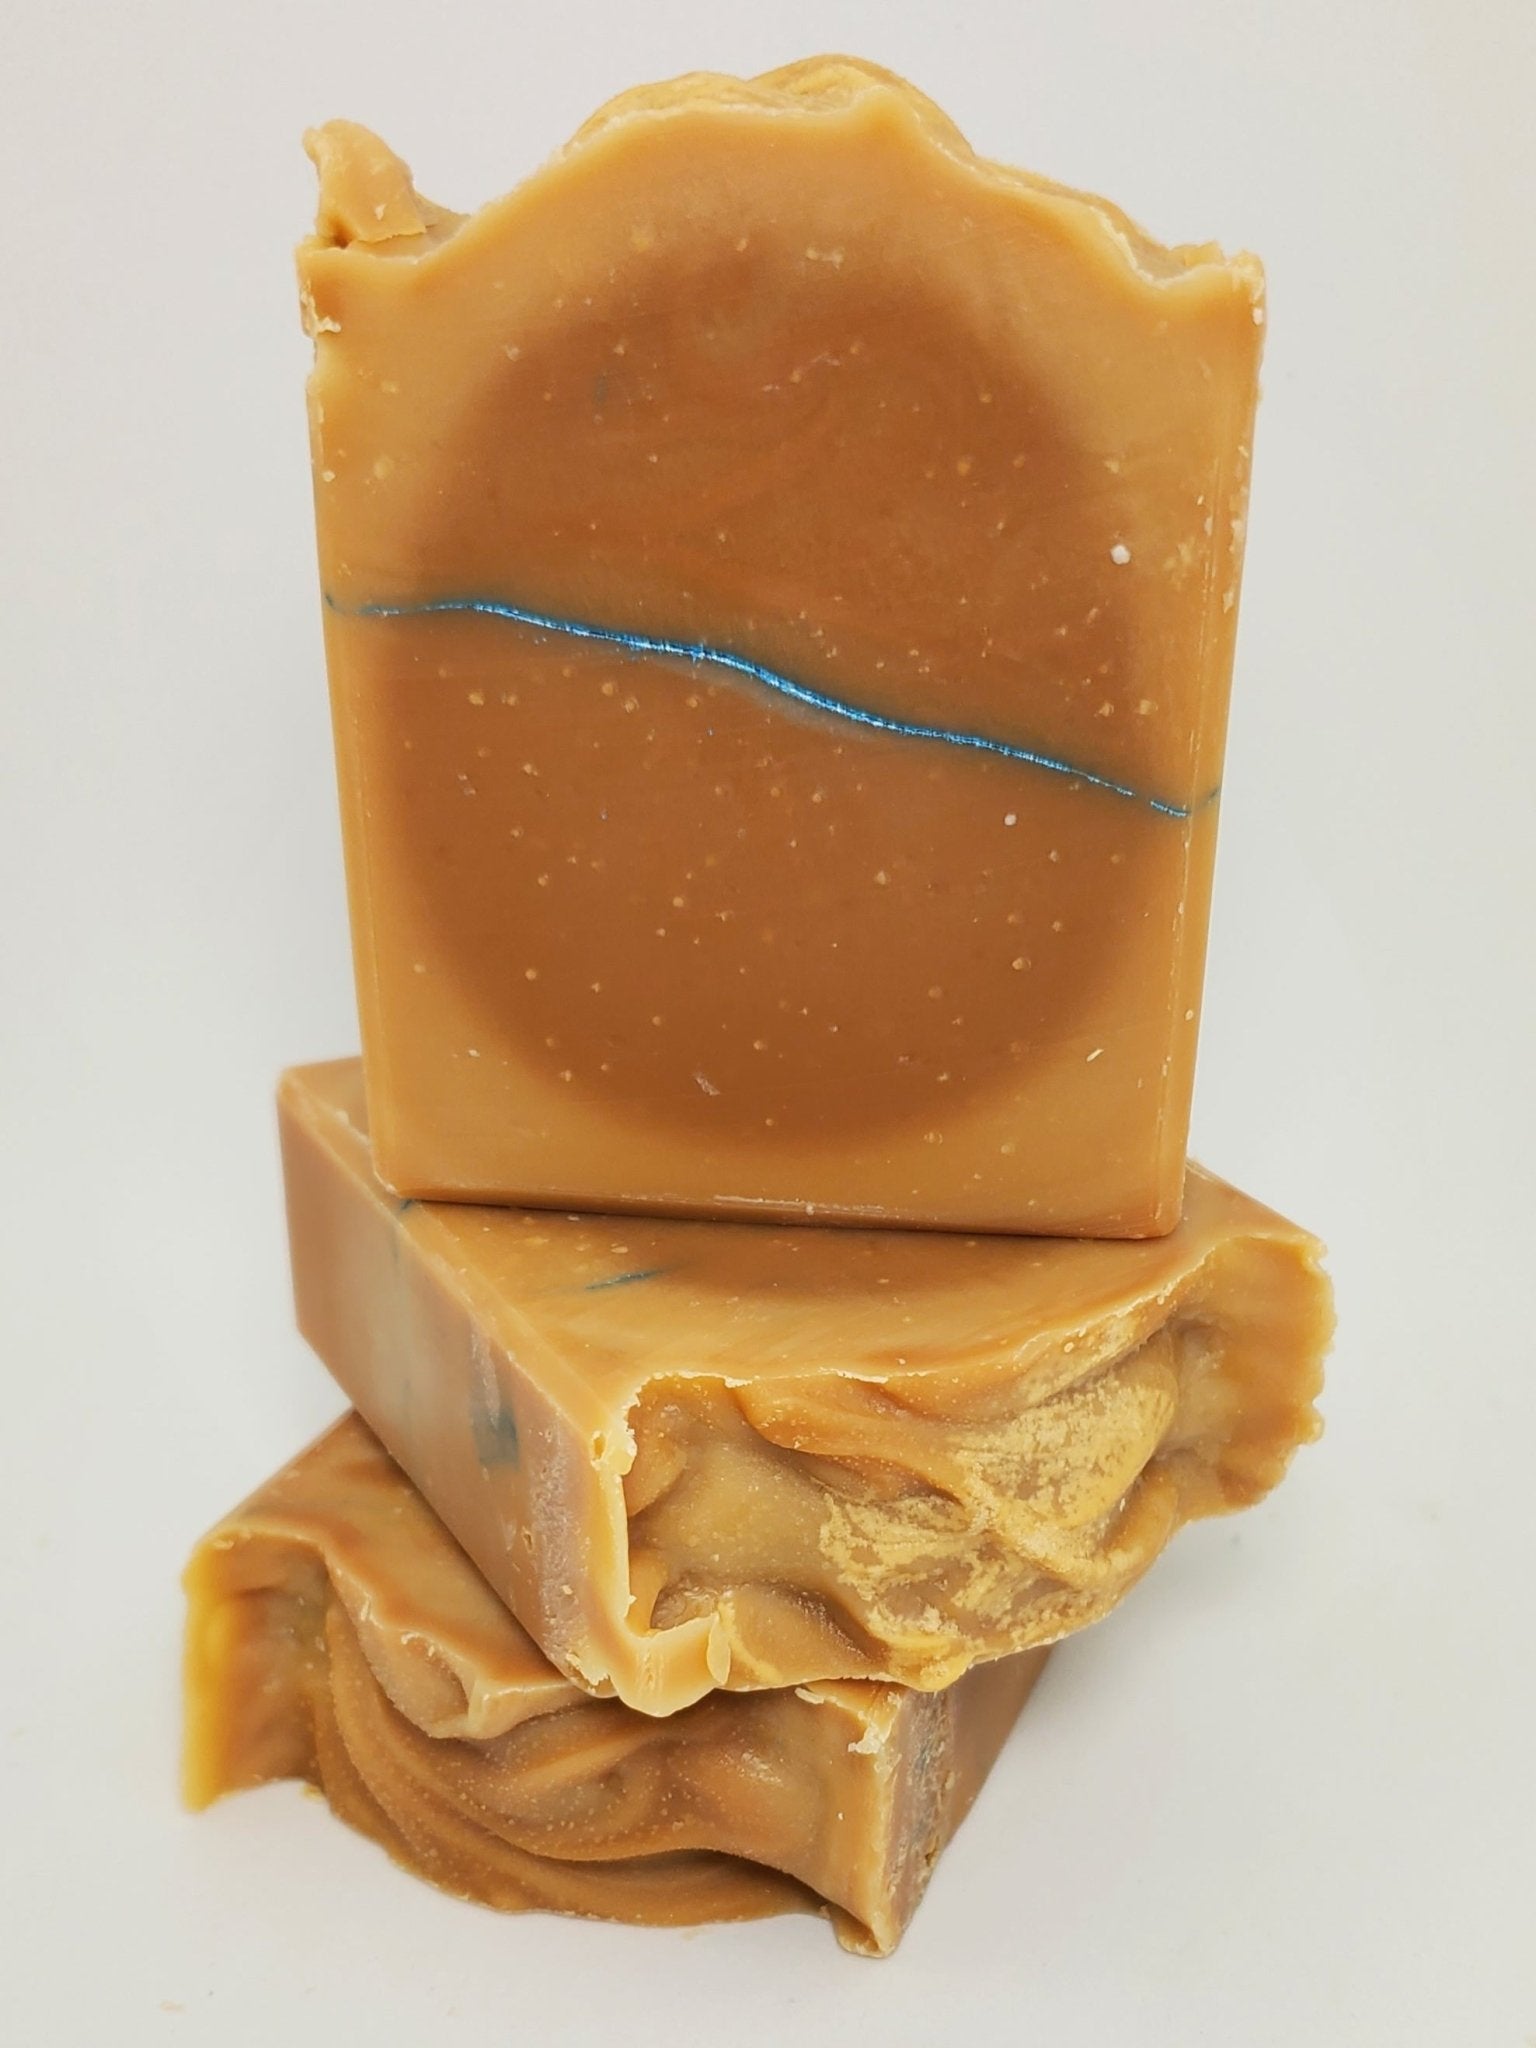 The Perfect Storm Beer Soap - FostersFieldssoap#soycandles#fostersfields#handmadesoap#natural soapbeer soapThe Perfect Storm Beer Soap